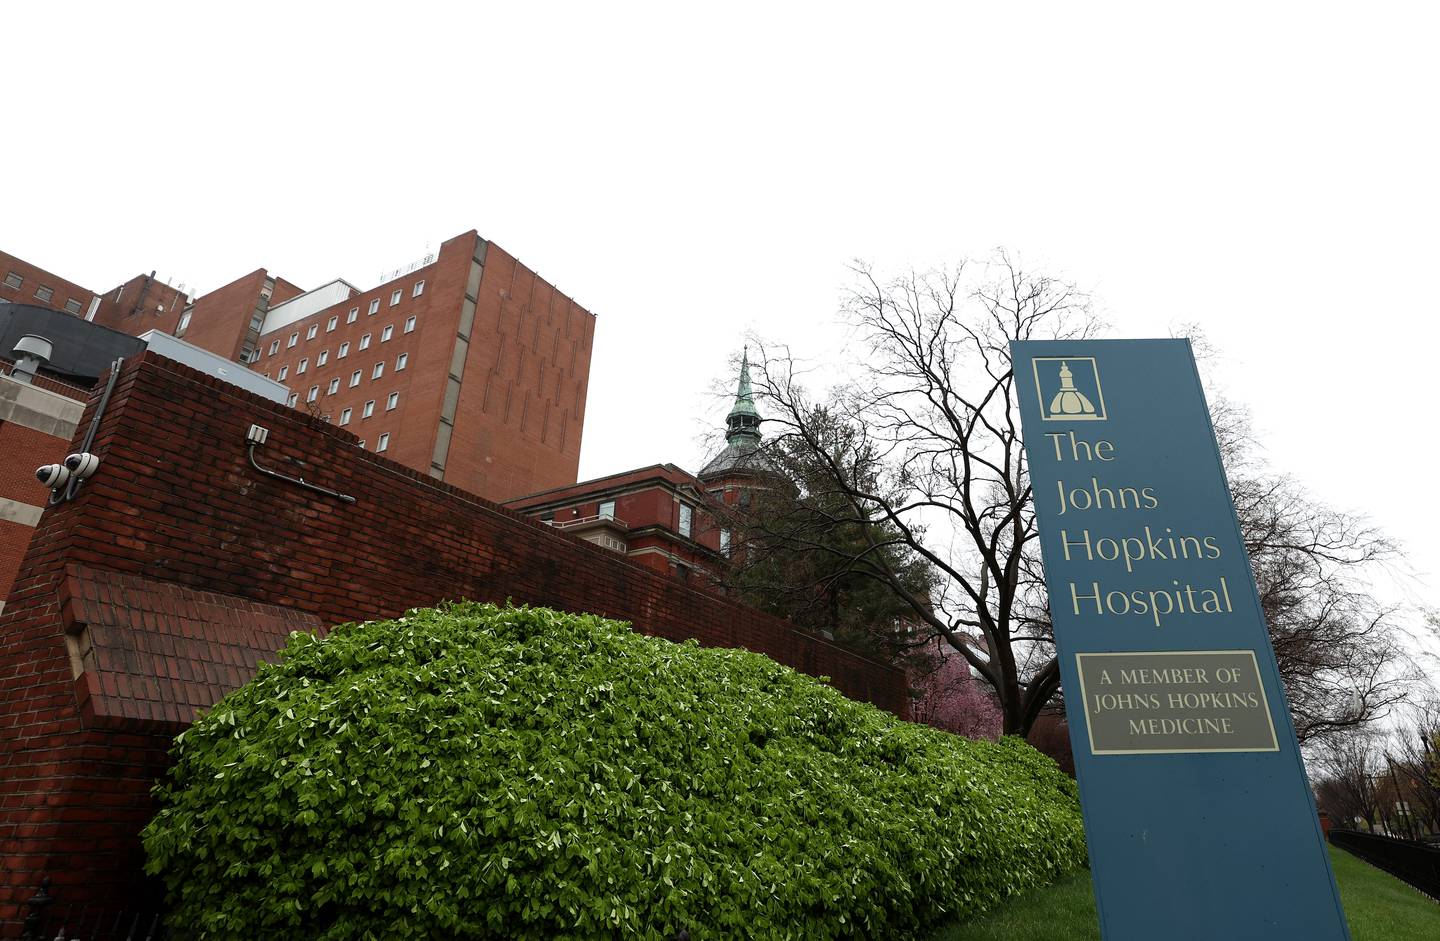 The Johns Hopkins Hospital in Baltimore, Maryland.